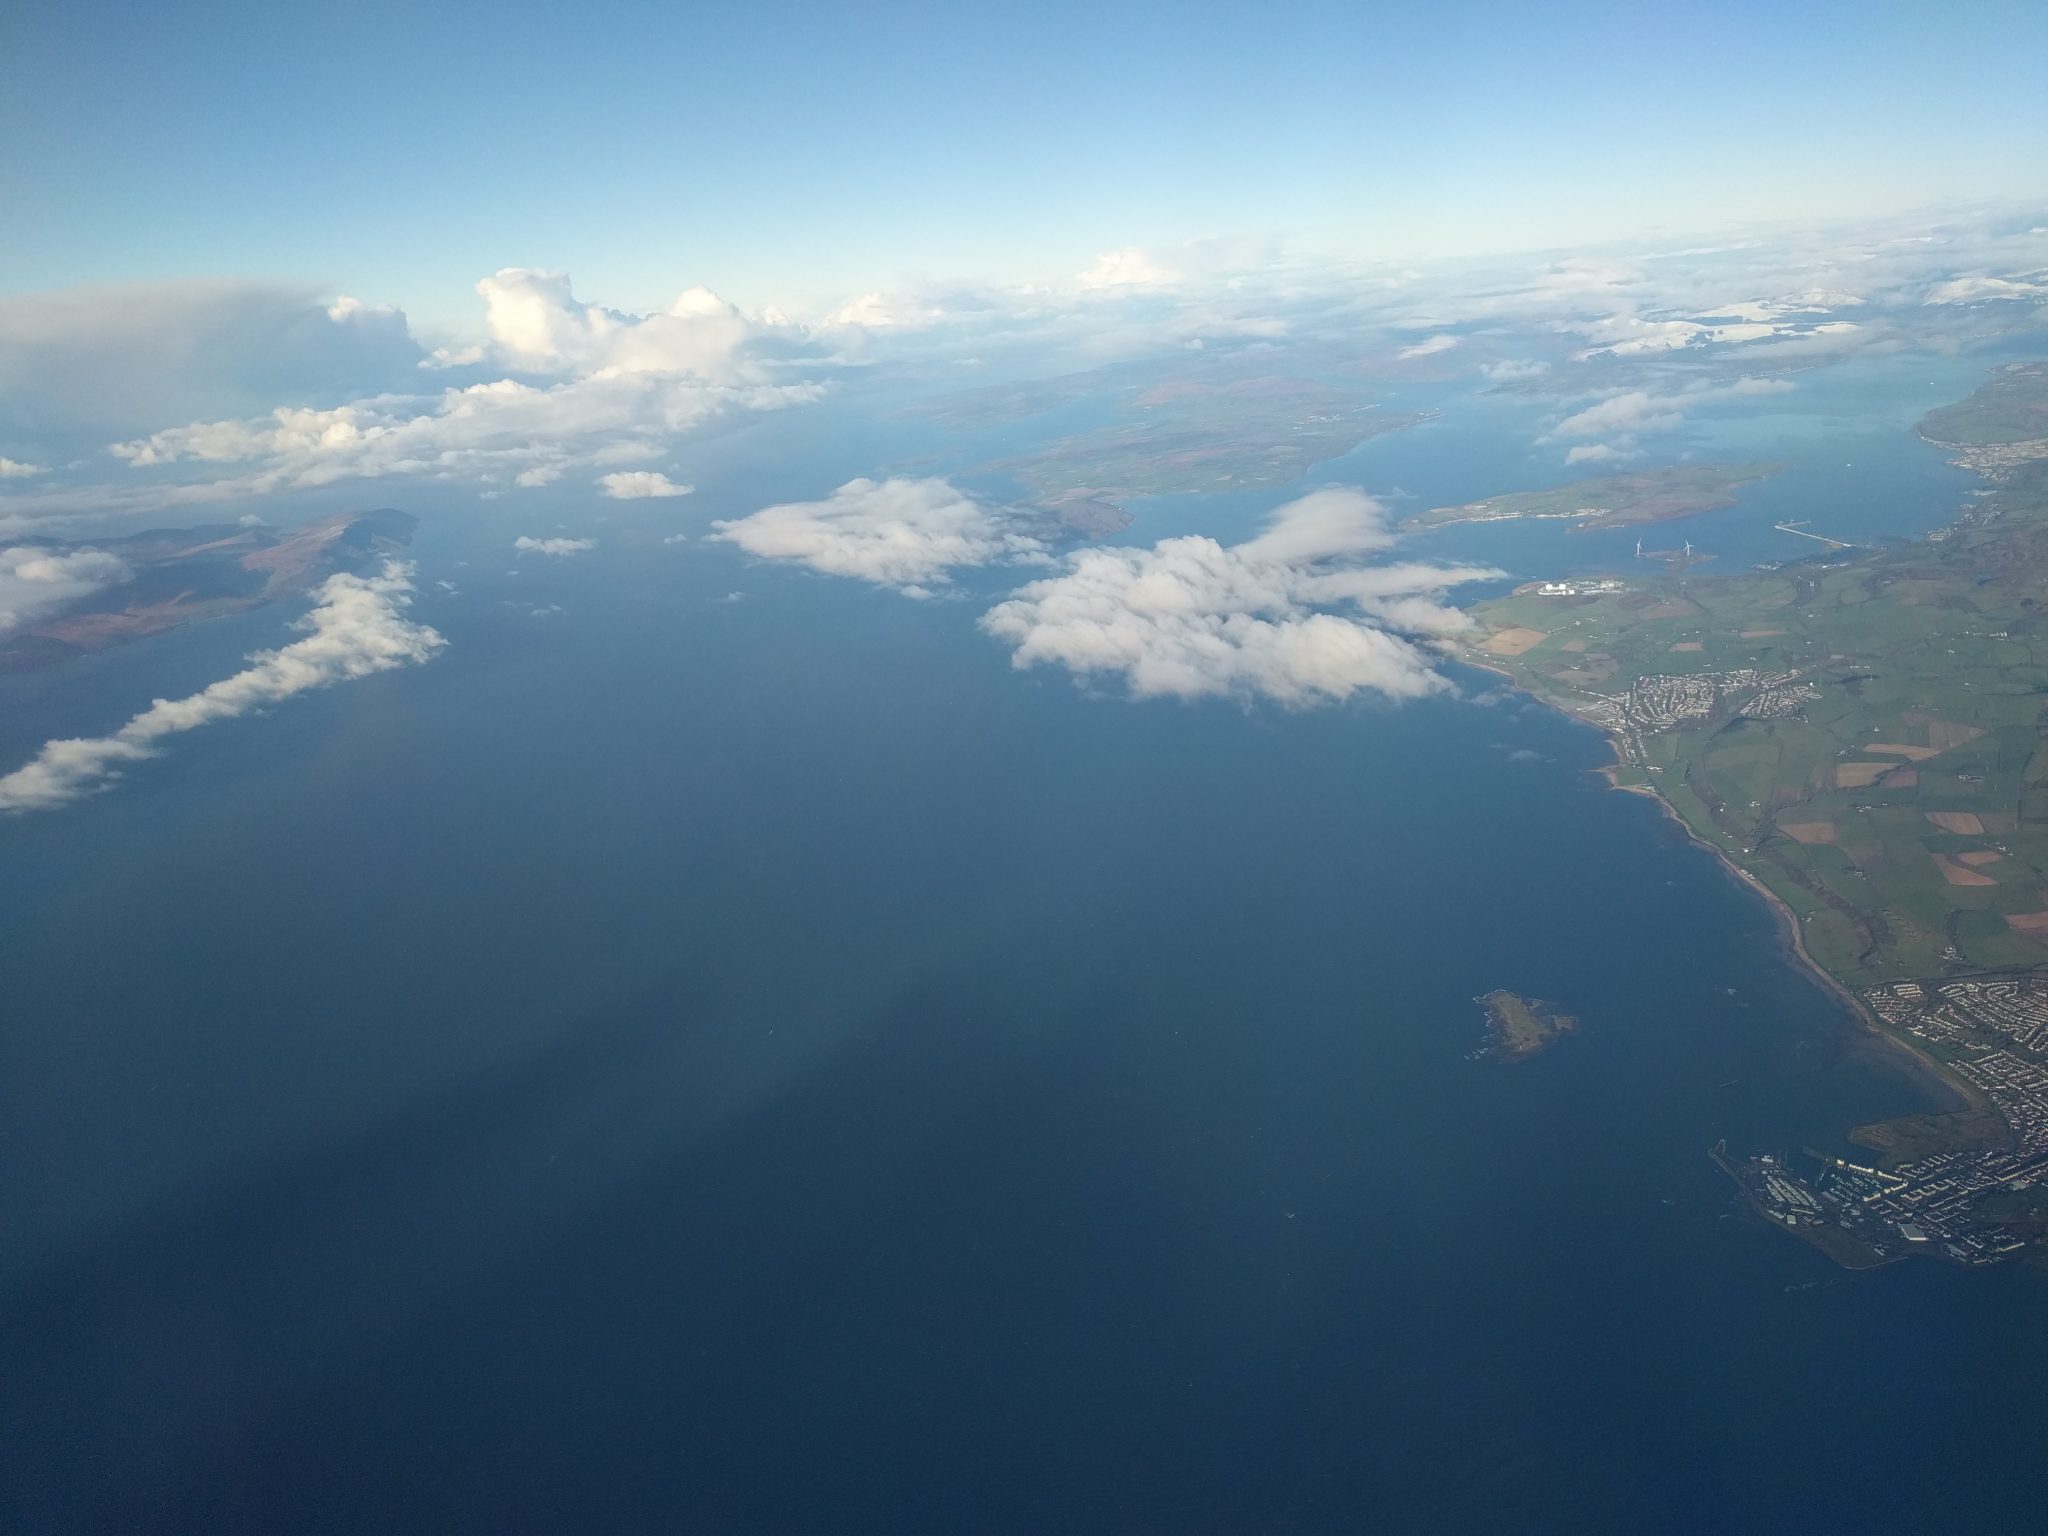 The coast of Scotland from the sky